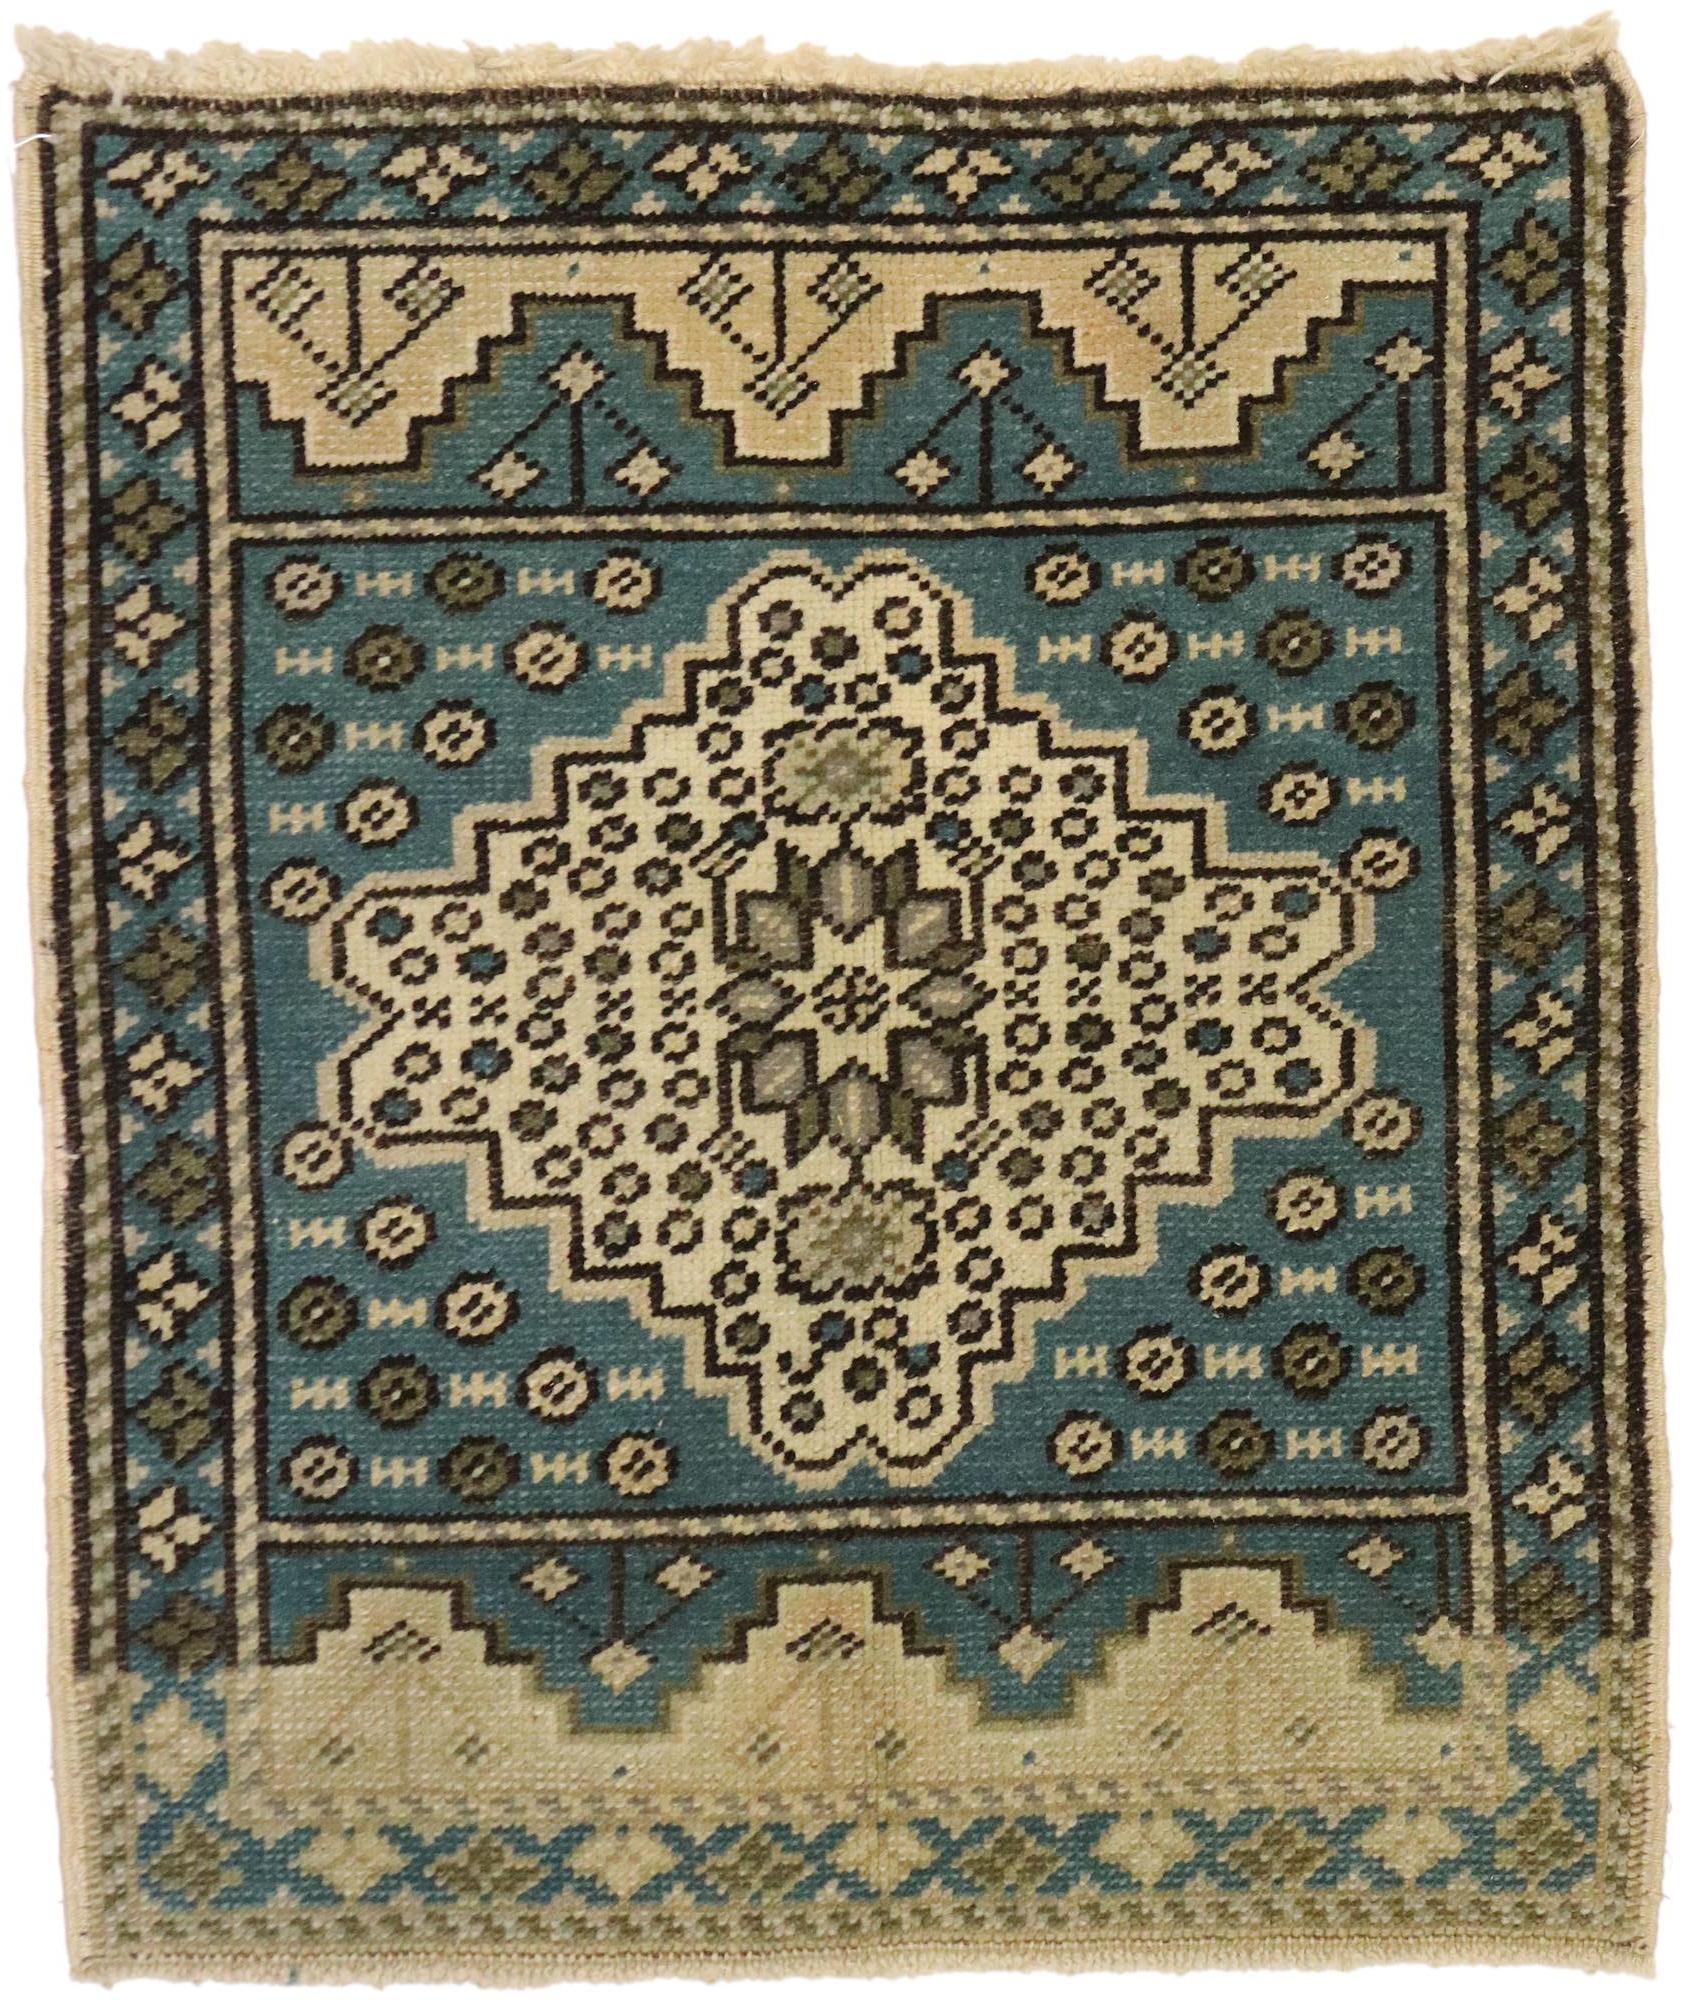 52280 Vintage Turkish Oushak Rug Yastik Scatter Rug, Square Accent Rug 01'10 x 02'02. With bluish hues and well-balanced symmetry paired with lovingly timeworn rusticity, this hand knotted wool vintage Turkish Oushak yastik scatter rug beautifully